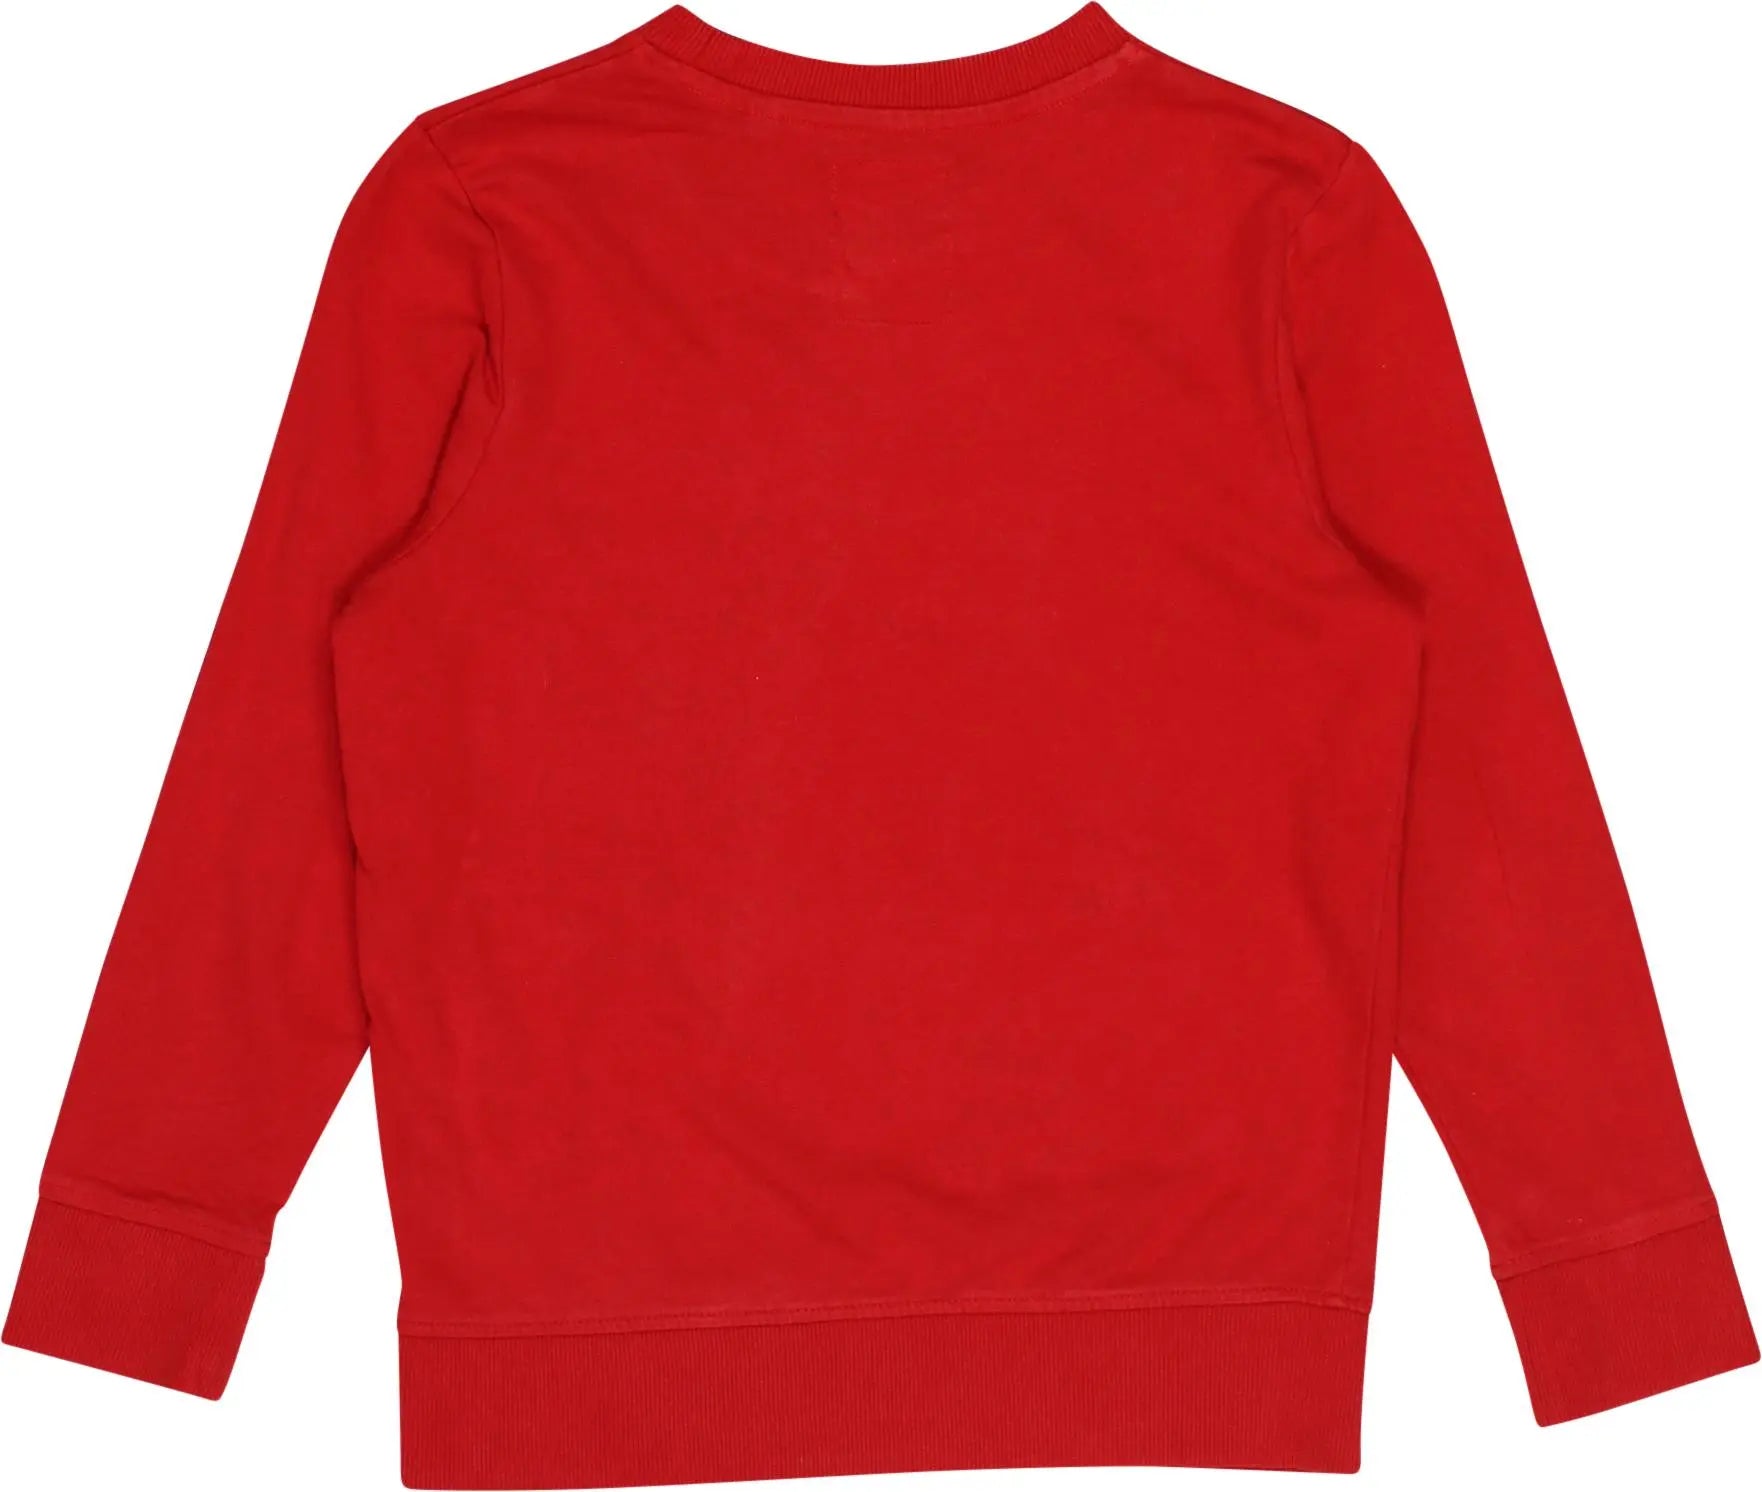 C&A - Red Sweatshirt- ThriftTale.com - Vintage and second handclothing